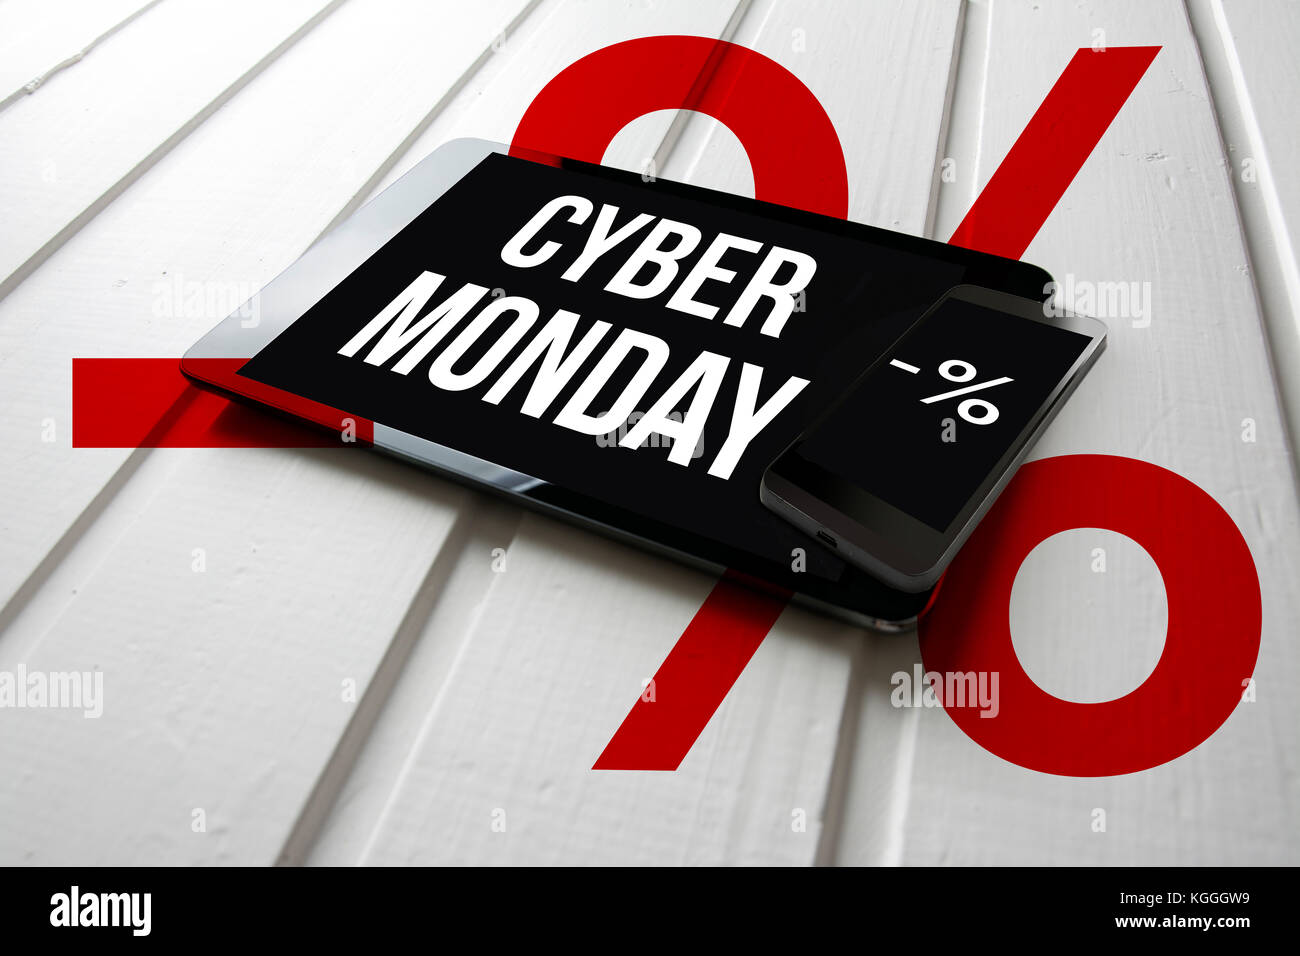 Cyber monday sale promotion on computer tablet screen, on white wood with percent symbol, online shopping concept. Stock Photo